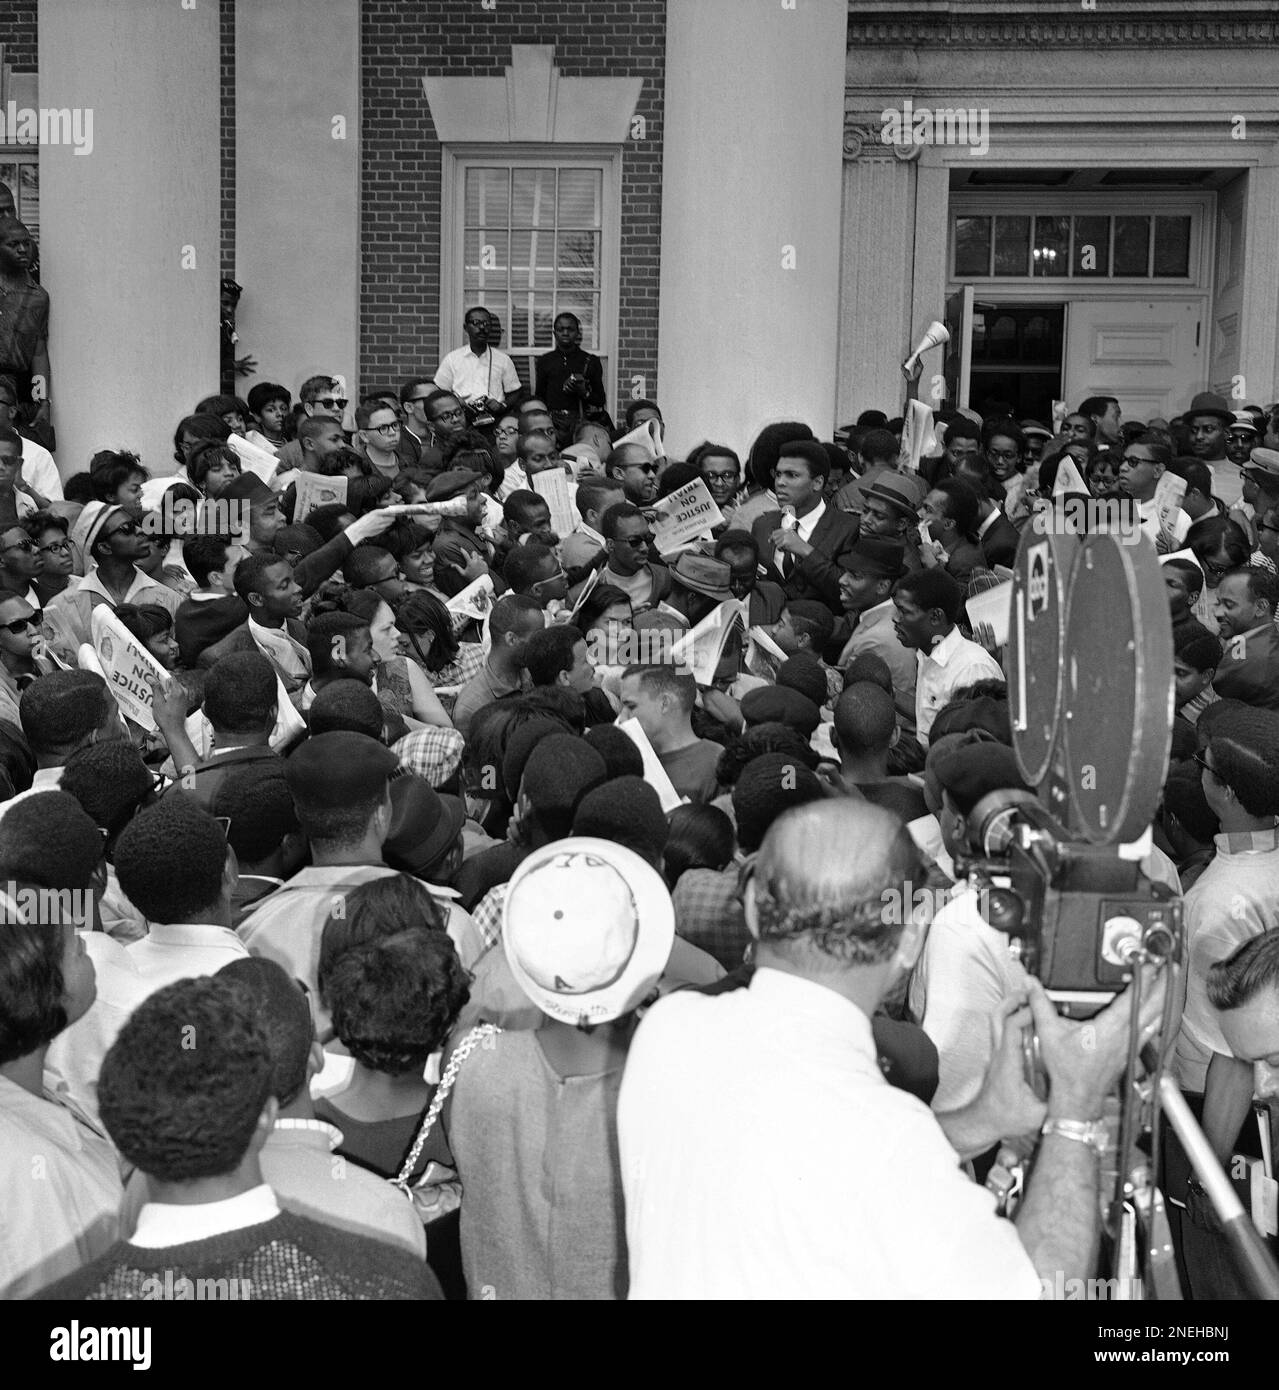 https://c8.alamy.com/comp/2NEHBNJ/heavyweight-boxing-champion-muhammad-ali-cassius-clay-displays-a-publication-titled-muhammad-speaks-as-he-addresses-a-rally-at-predominantly-black-howard-university-on-april-22-1967-in-washington-clay-who-prefers-to-be-called-muhammad-ali-faces-induction-in-the-army-on-april-28-but-he-says-hell-go-to-prison-before-he-serves-ap-photocharles-gorry-2NEHBNJ.jpg